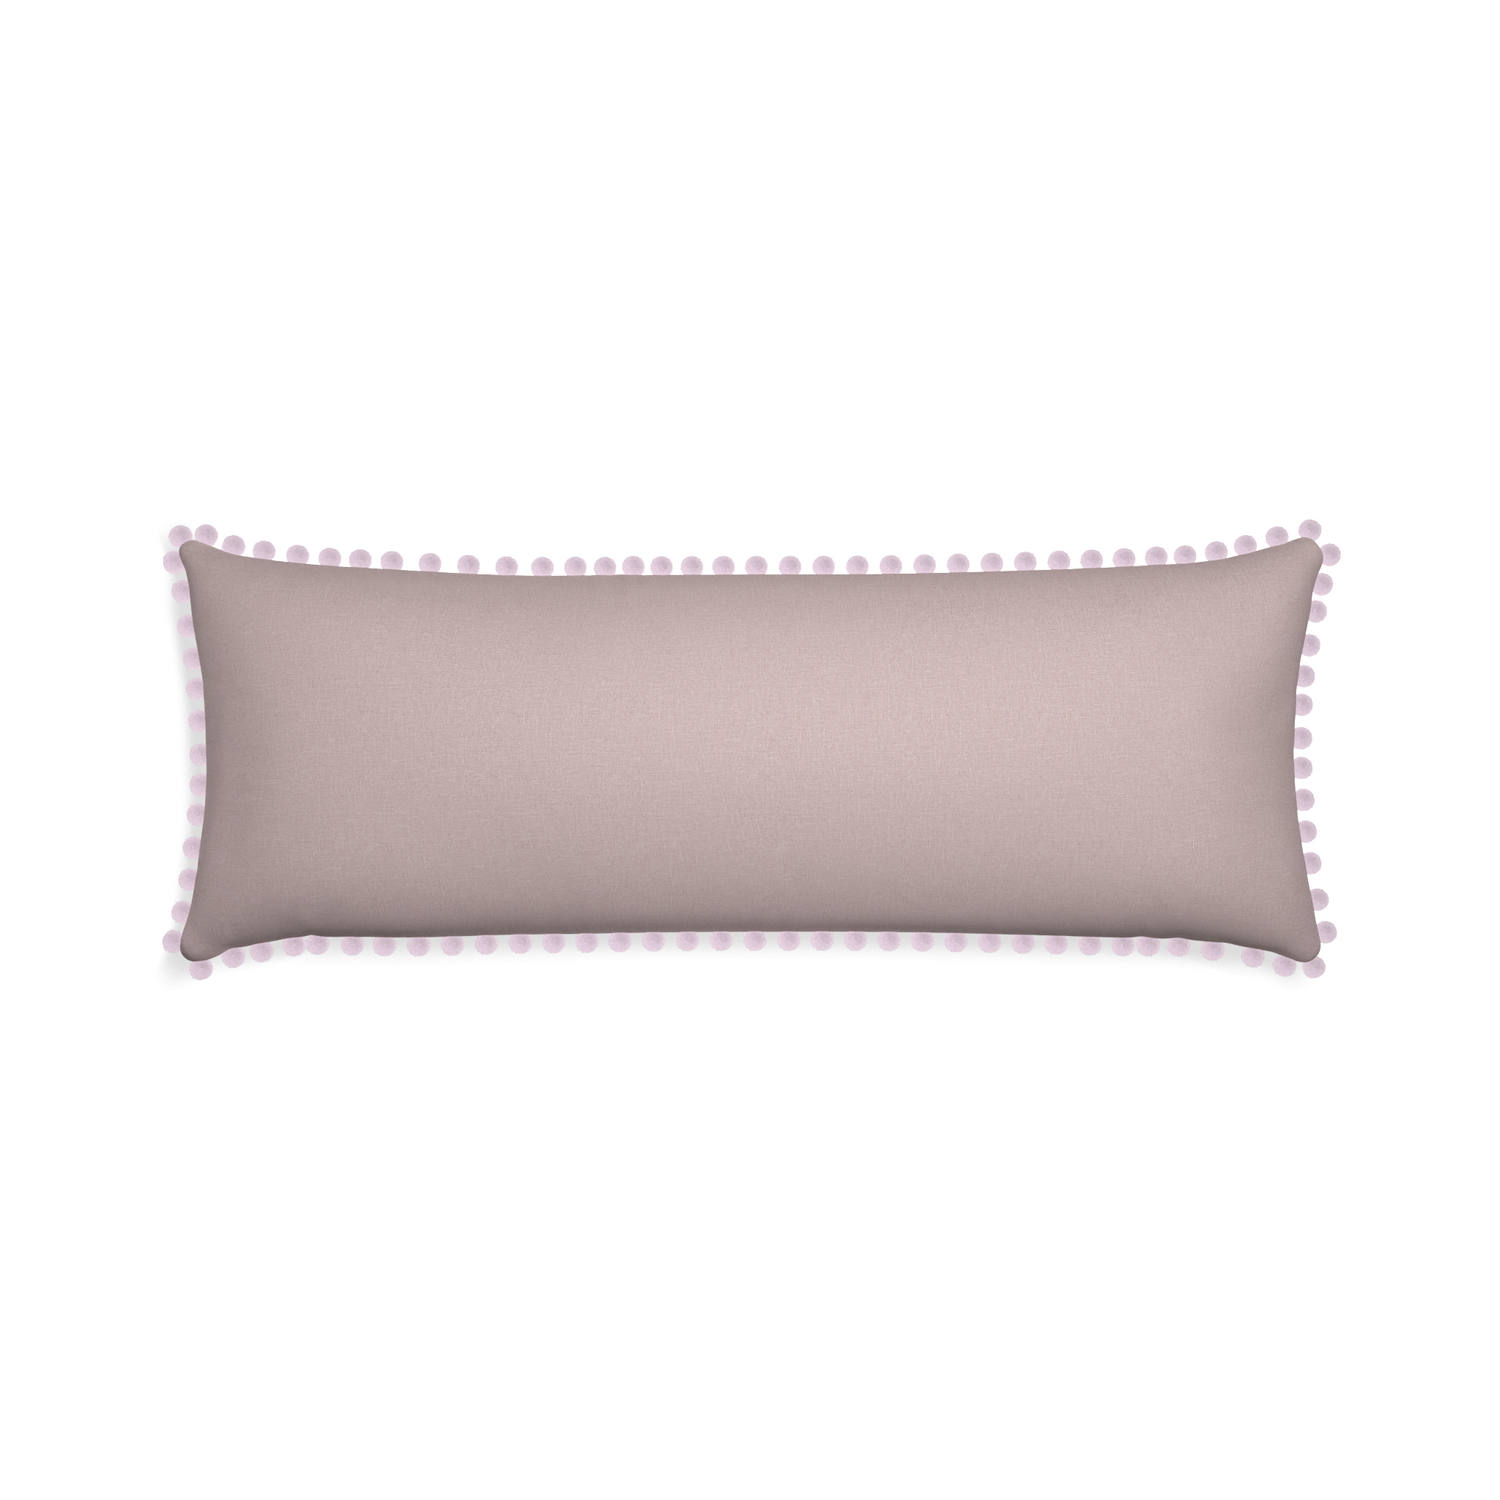 Xl-lumbar orchid custom mauve pinkpillow with l on white background